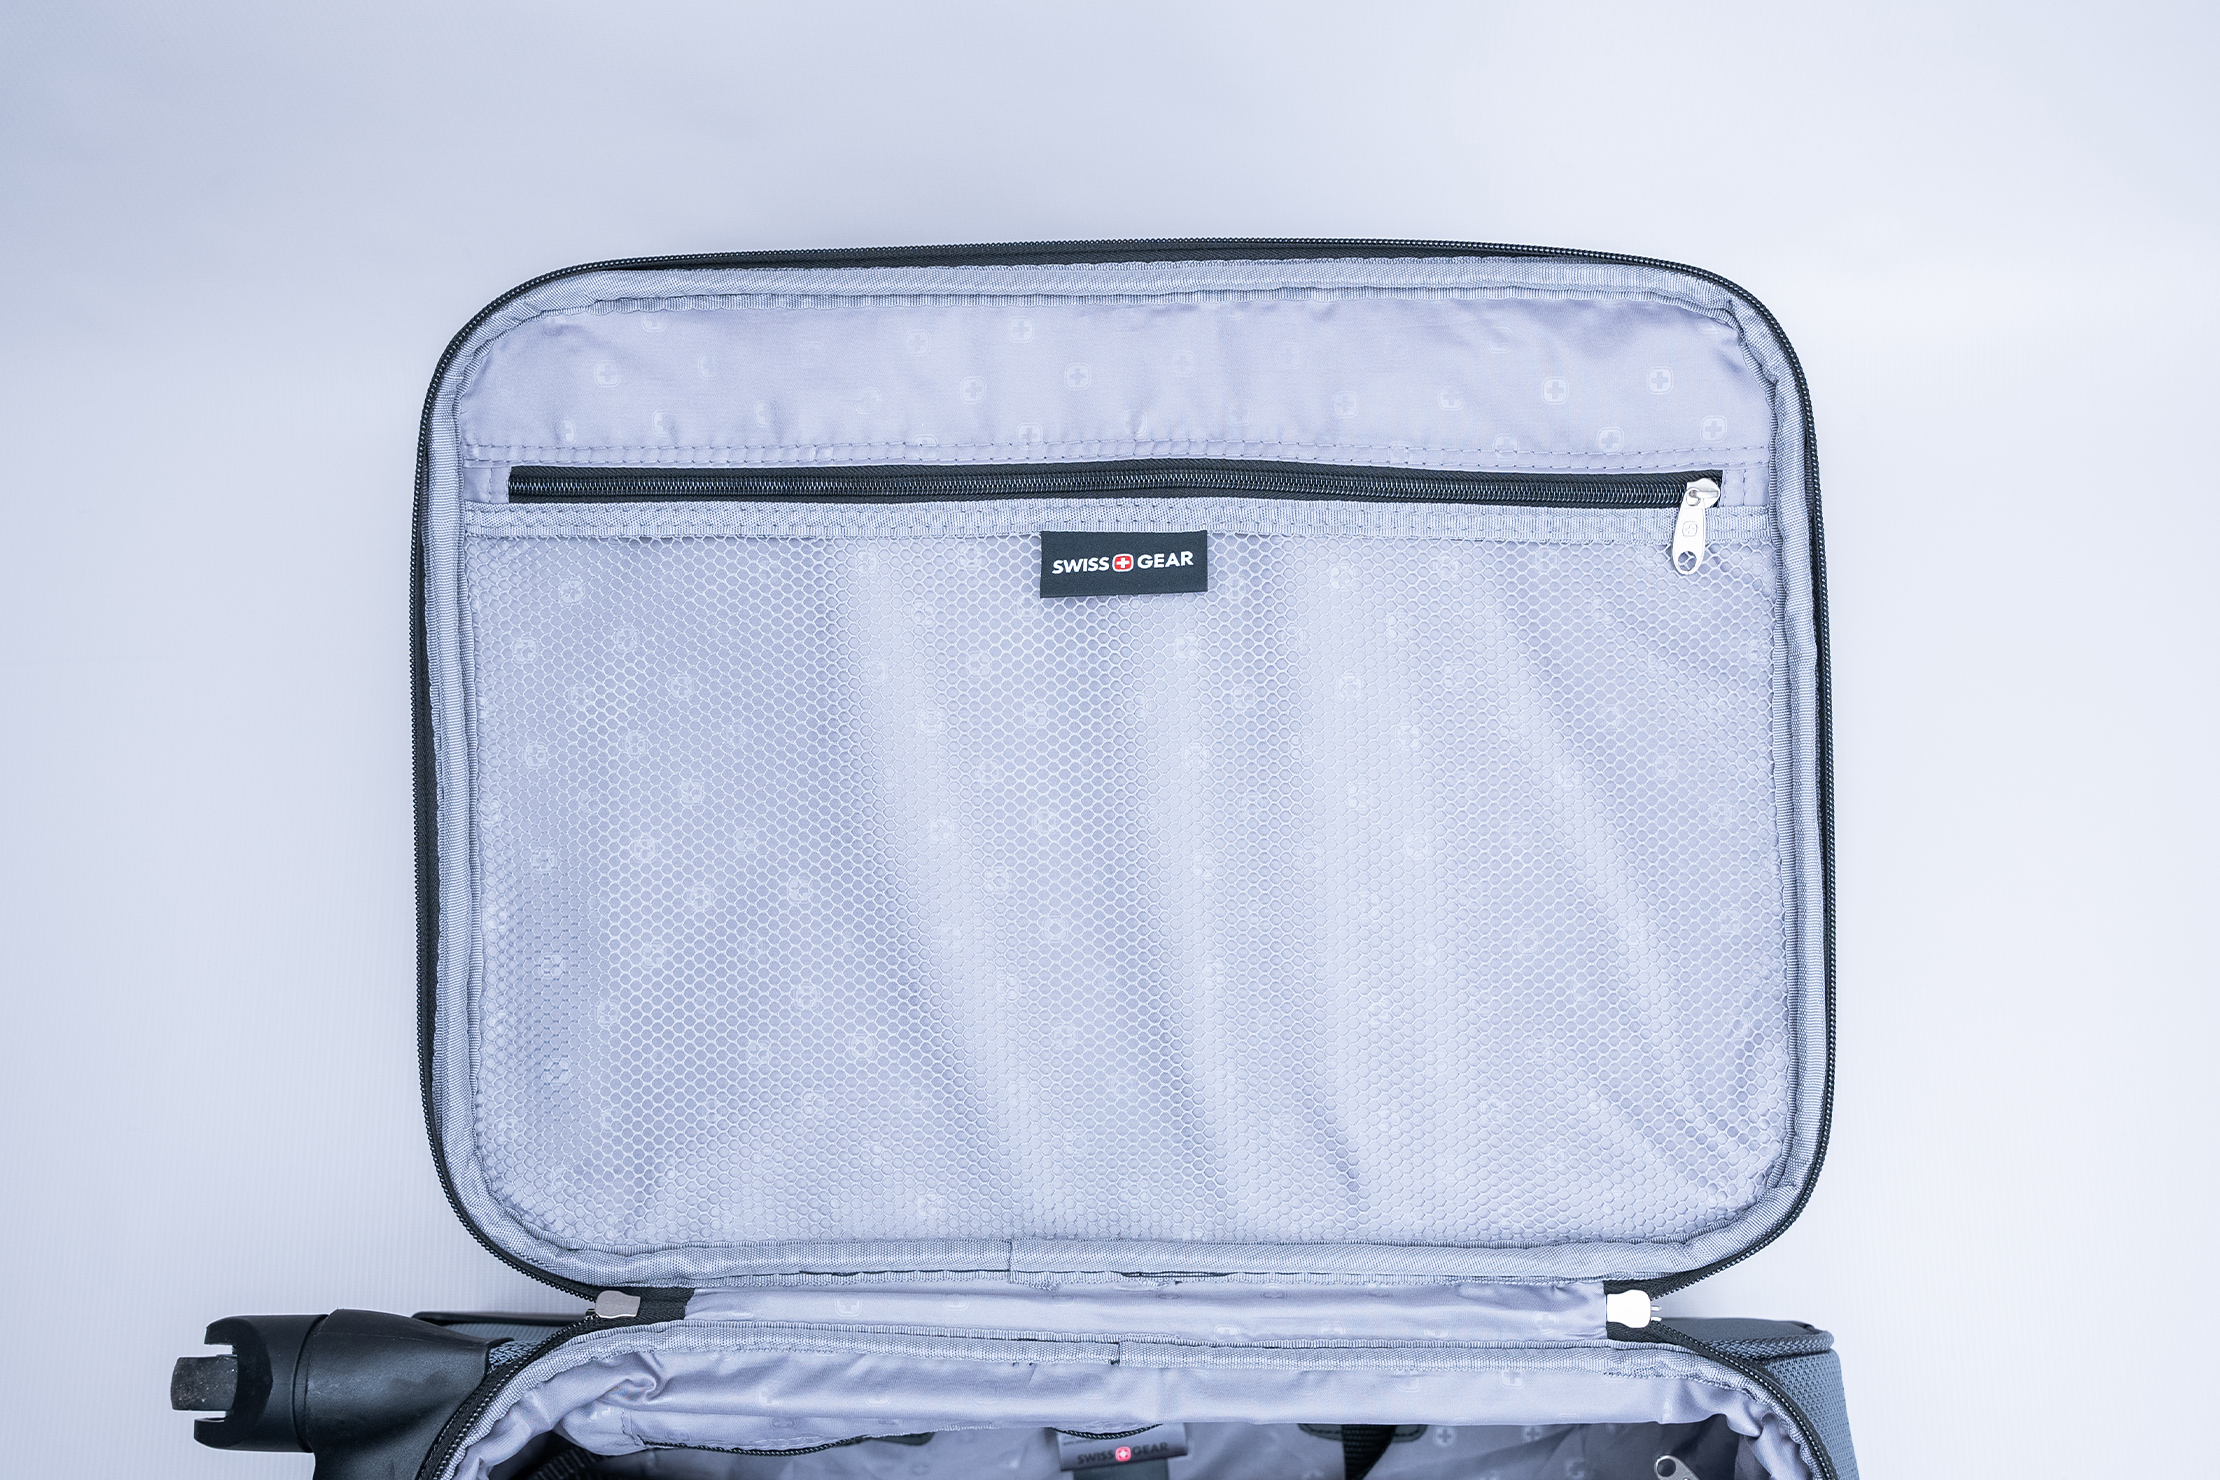 SWISSGEAR Sion 6283 21" Expandable Carry On Spinner Luggage Pocket Interior